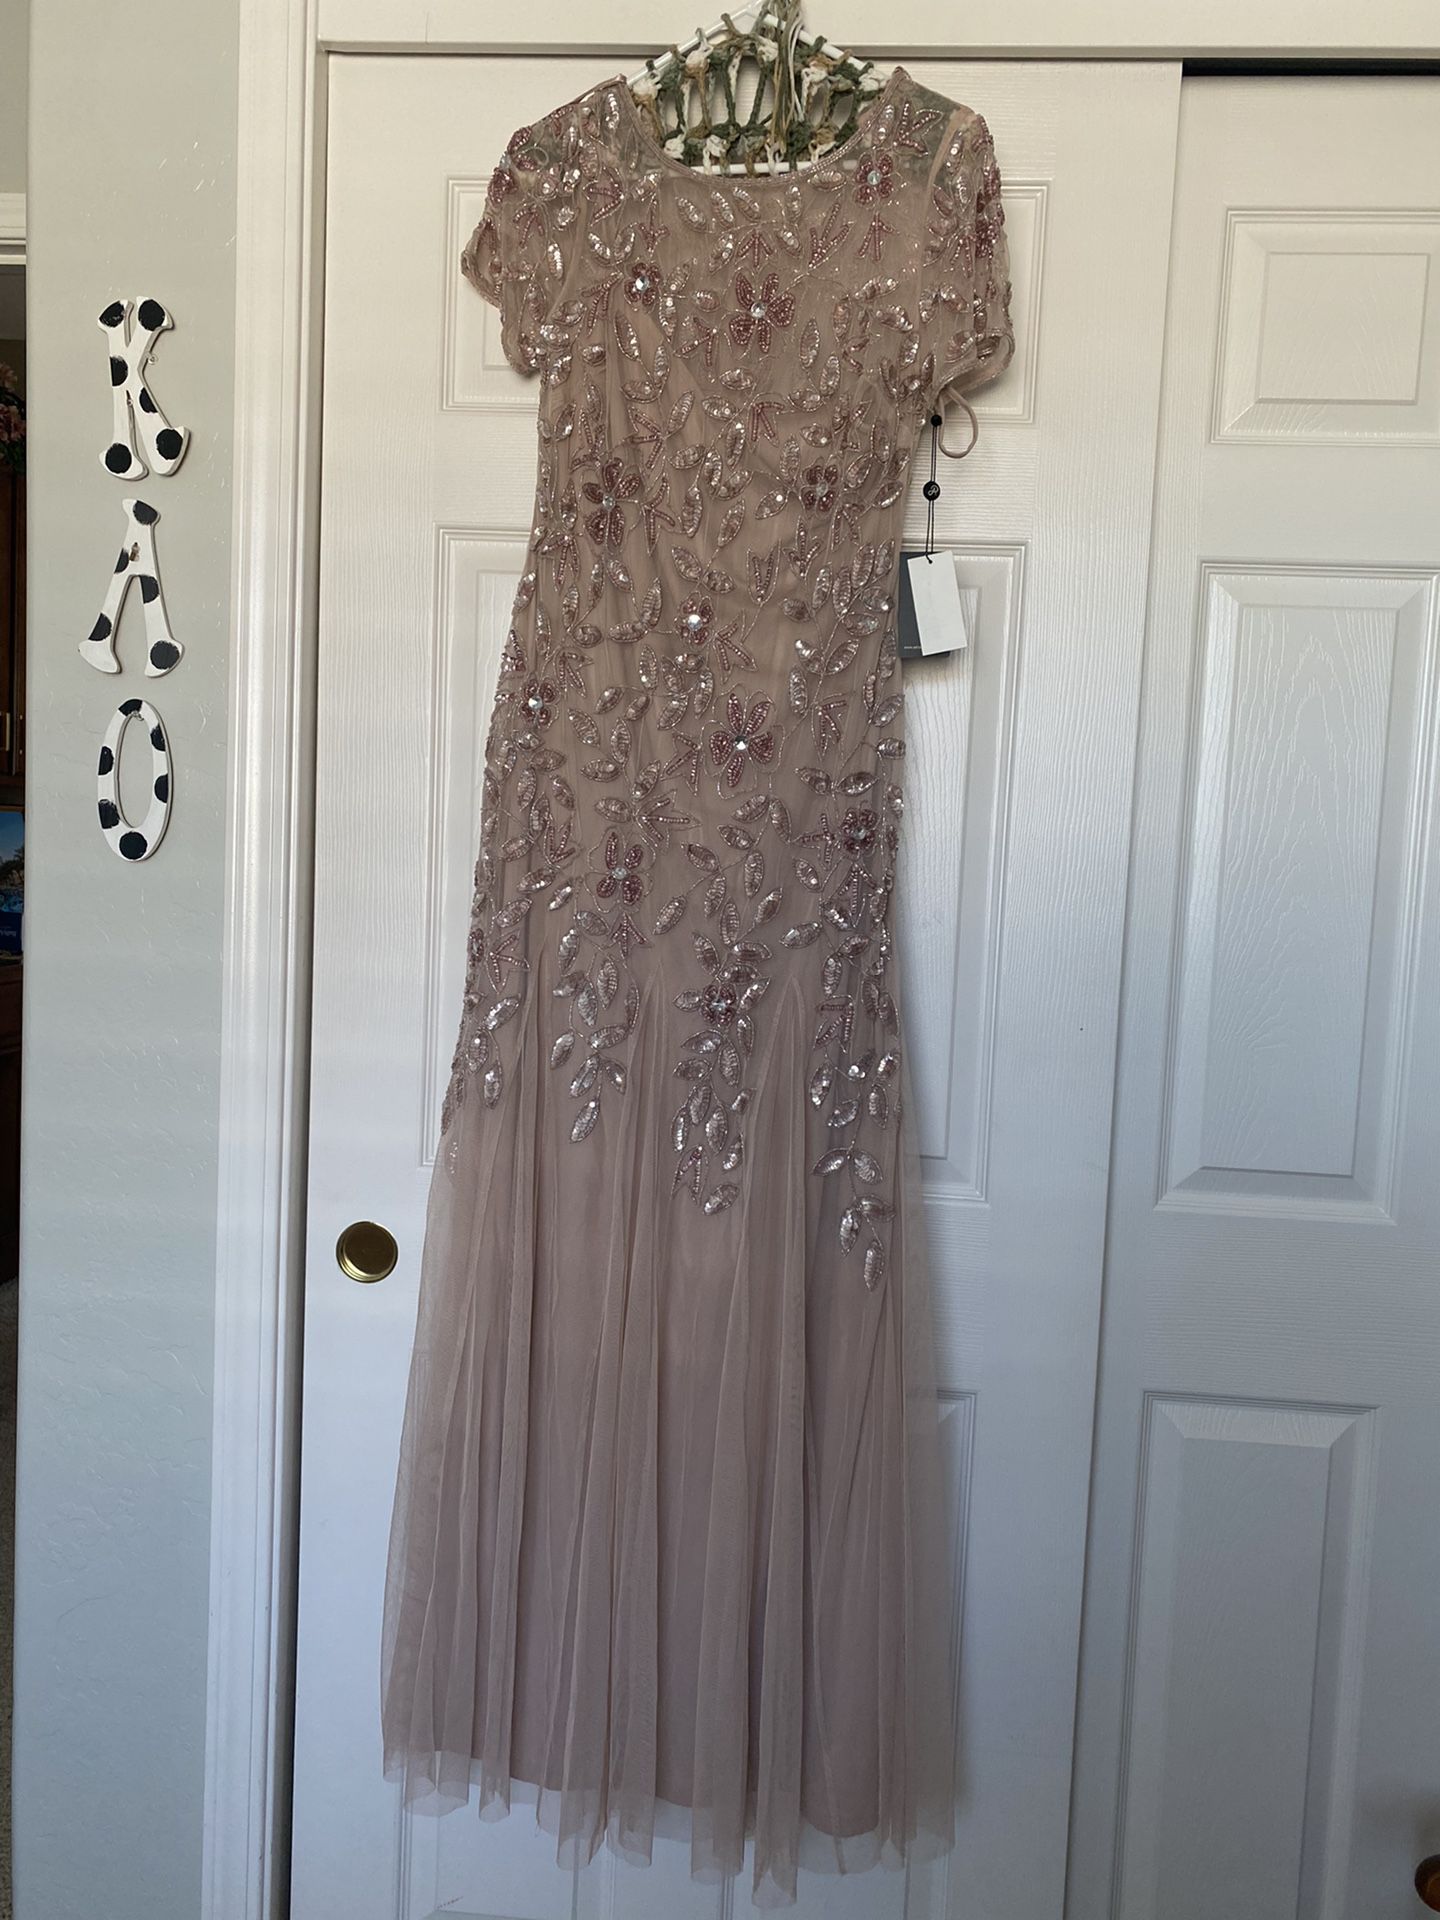 Adrianna Papell Gown Size 8